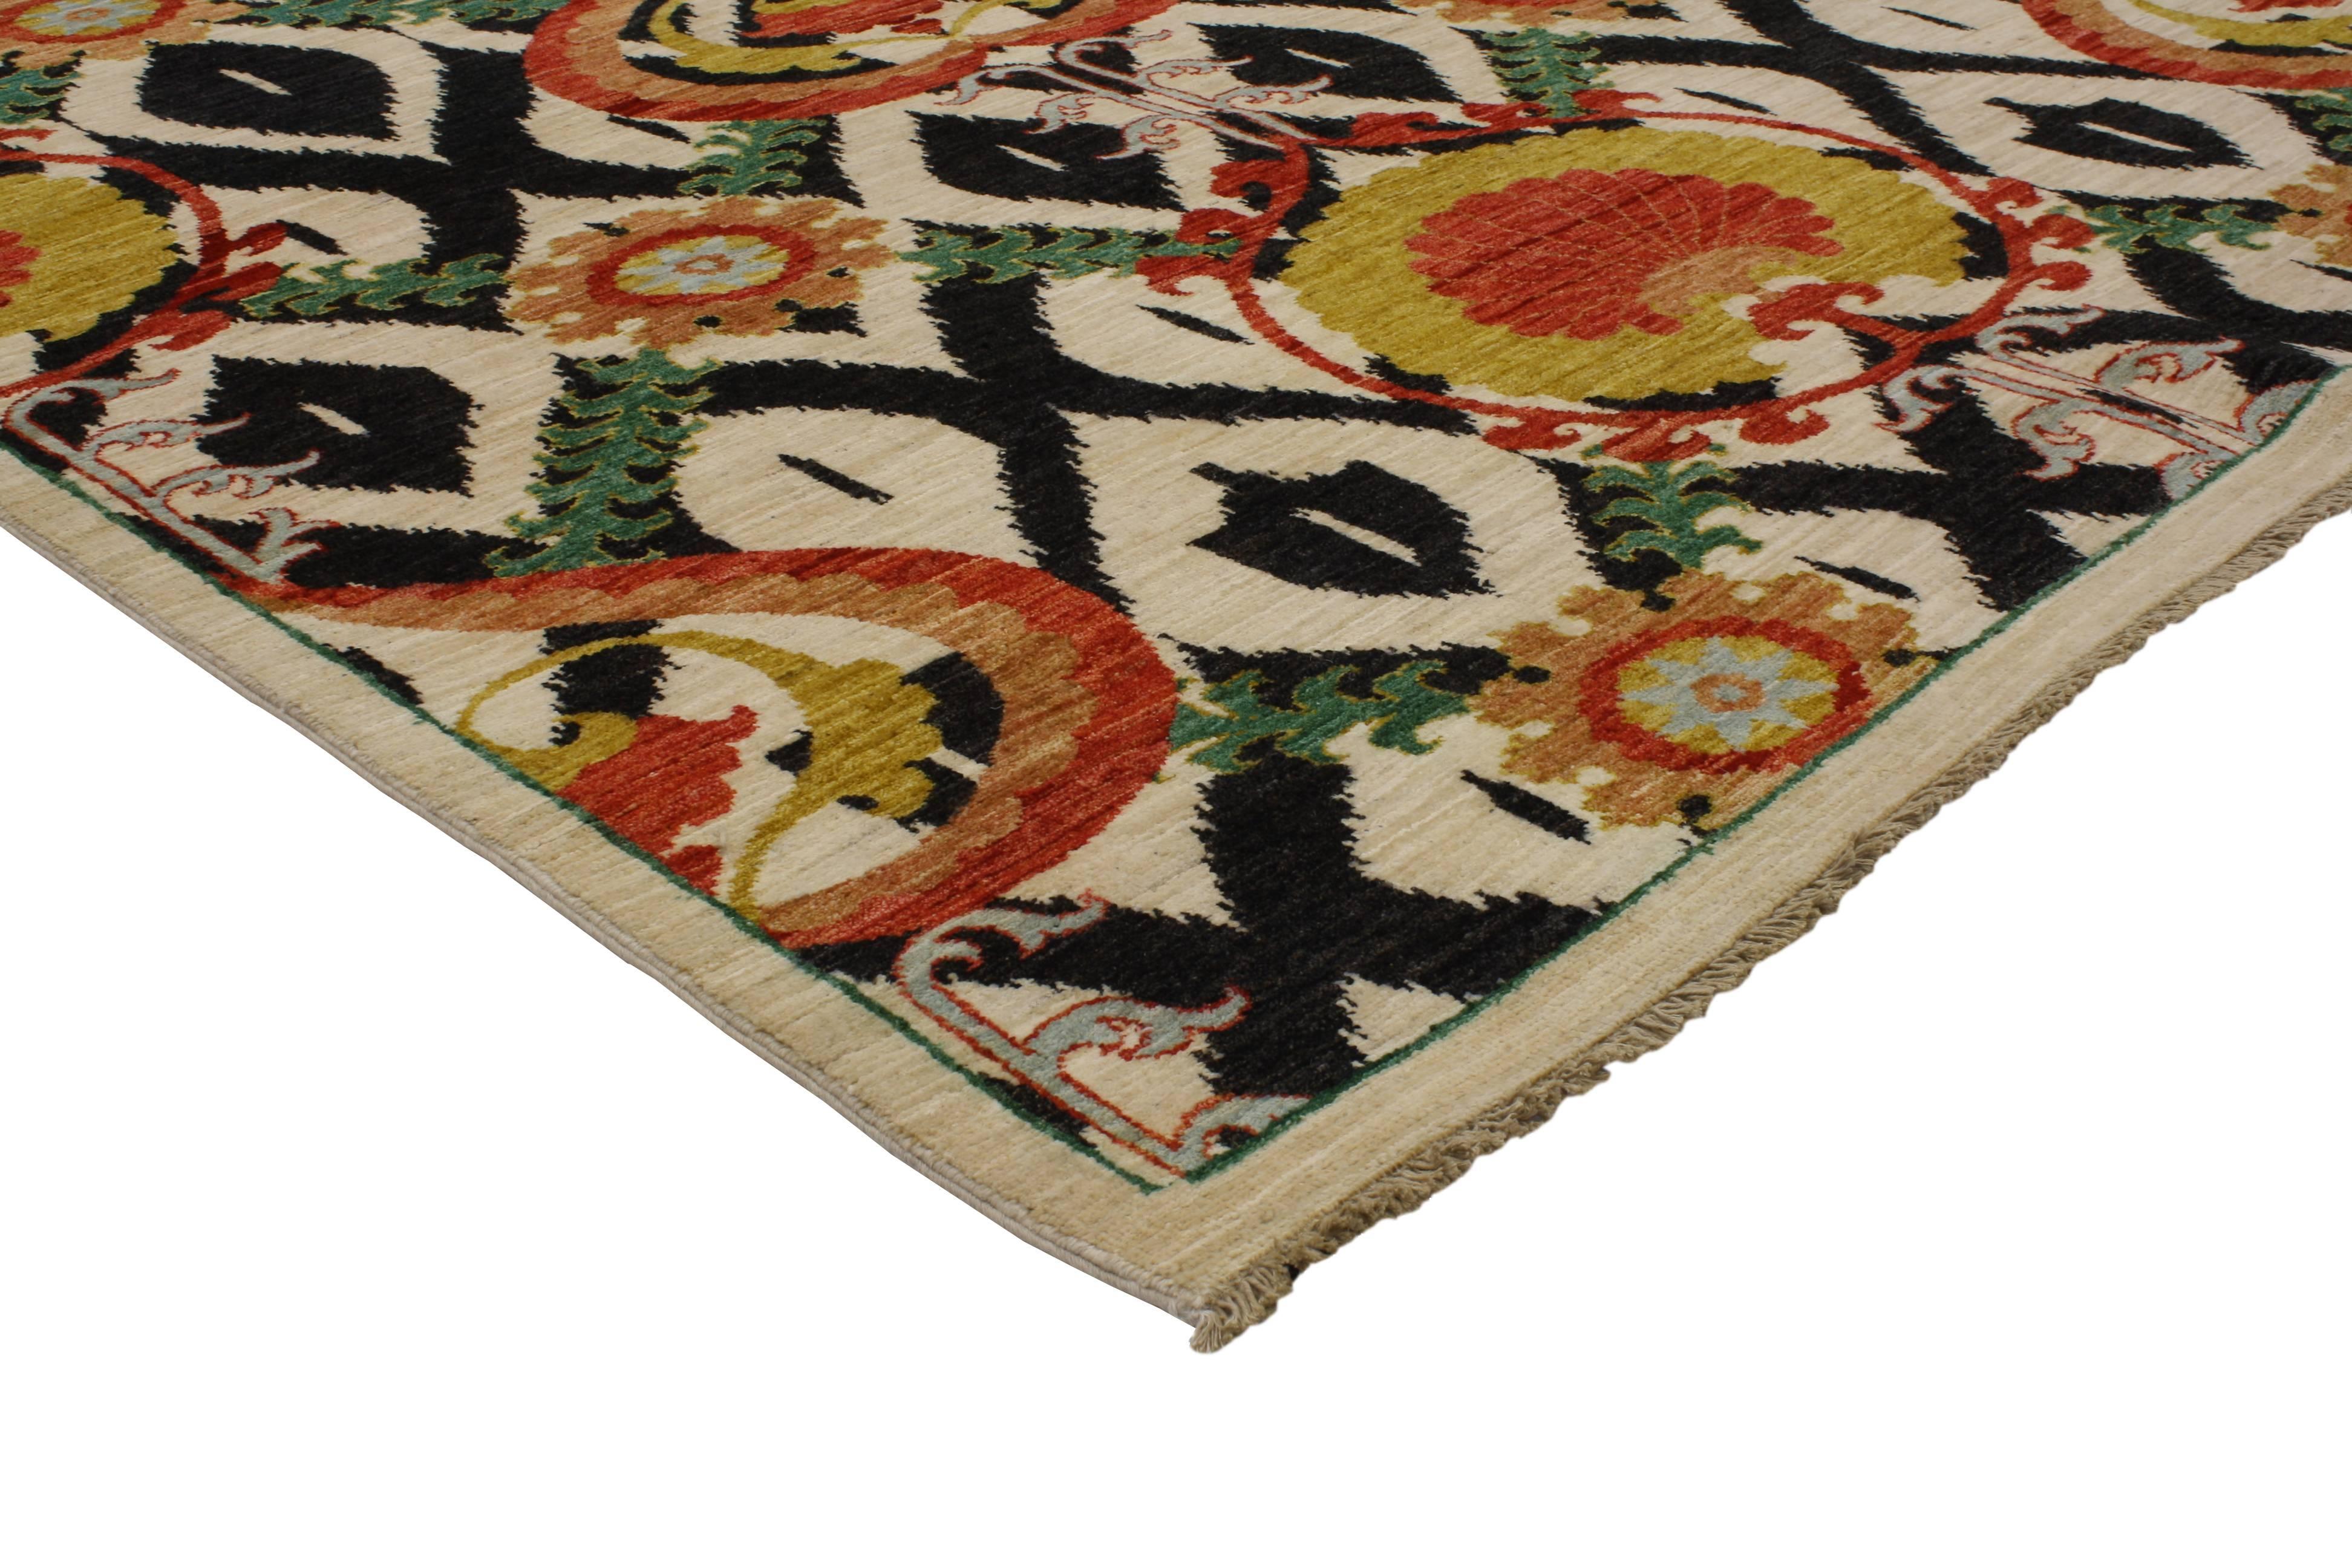 80357 New Transitional Area Rug with Modern Style. Evoke an exotic escape with this transitional rug featuring a contemporary ogival pattern and Modern style. This beautifully detailed transitional rug keeps the eyes entertained, yet it’s still